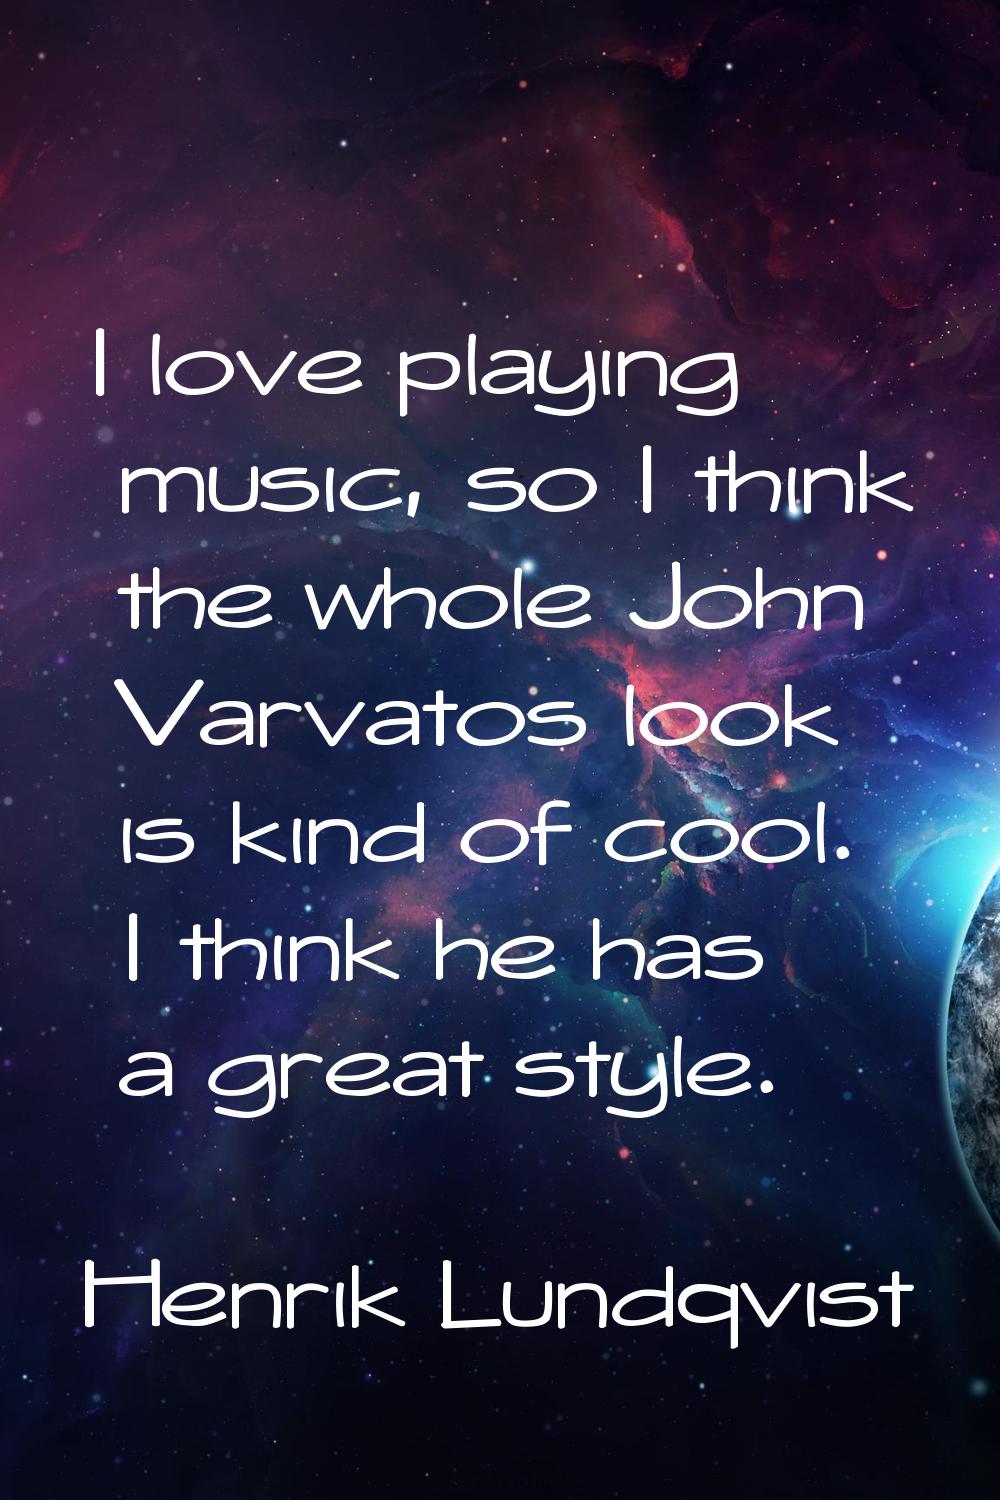 I love playing music, so I think the whole John Varvatos look is kind of cool. I think he has a gre